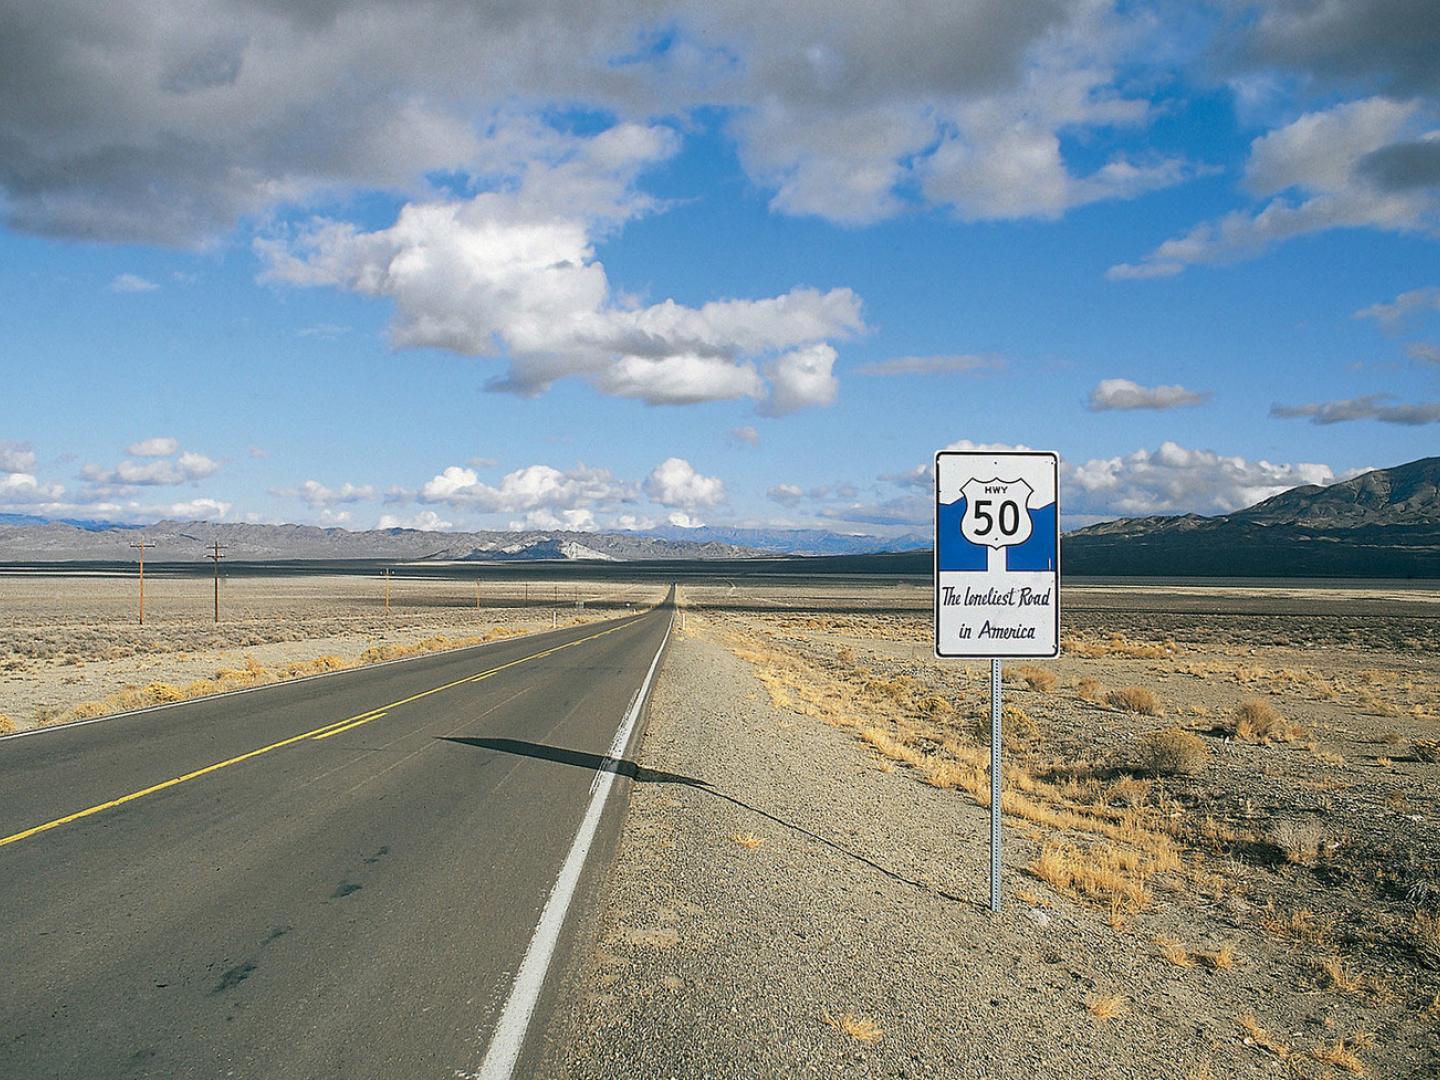 U.S. Route 50 - Known as America's most lonely road. Scary at times ...